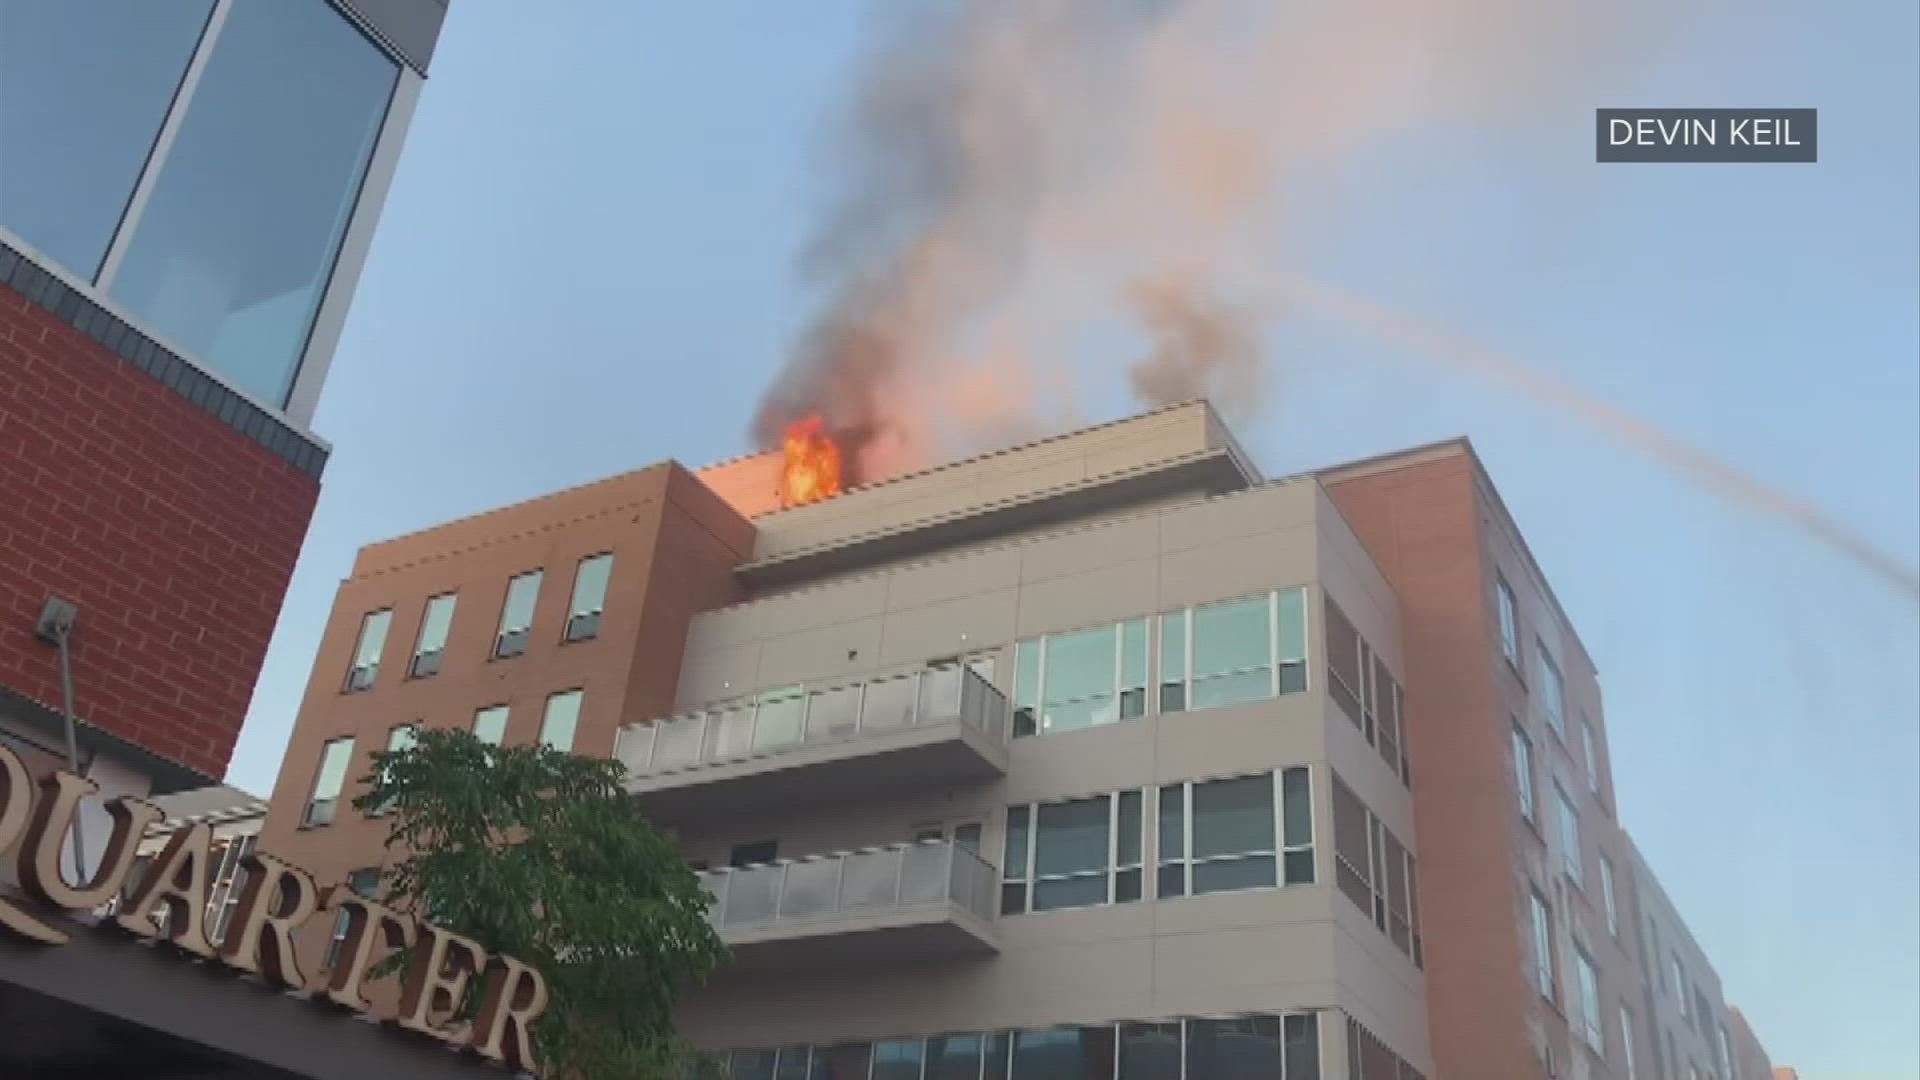 The fire started in the residential deck area on the roof of the apartments above Urban Meyer's Pint House on Longshore Street.